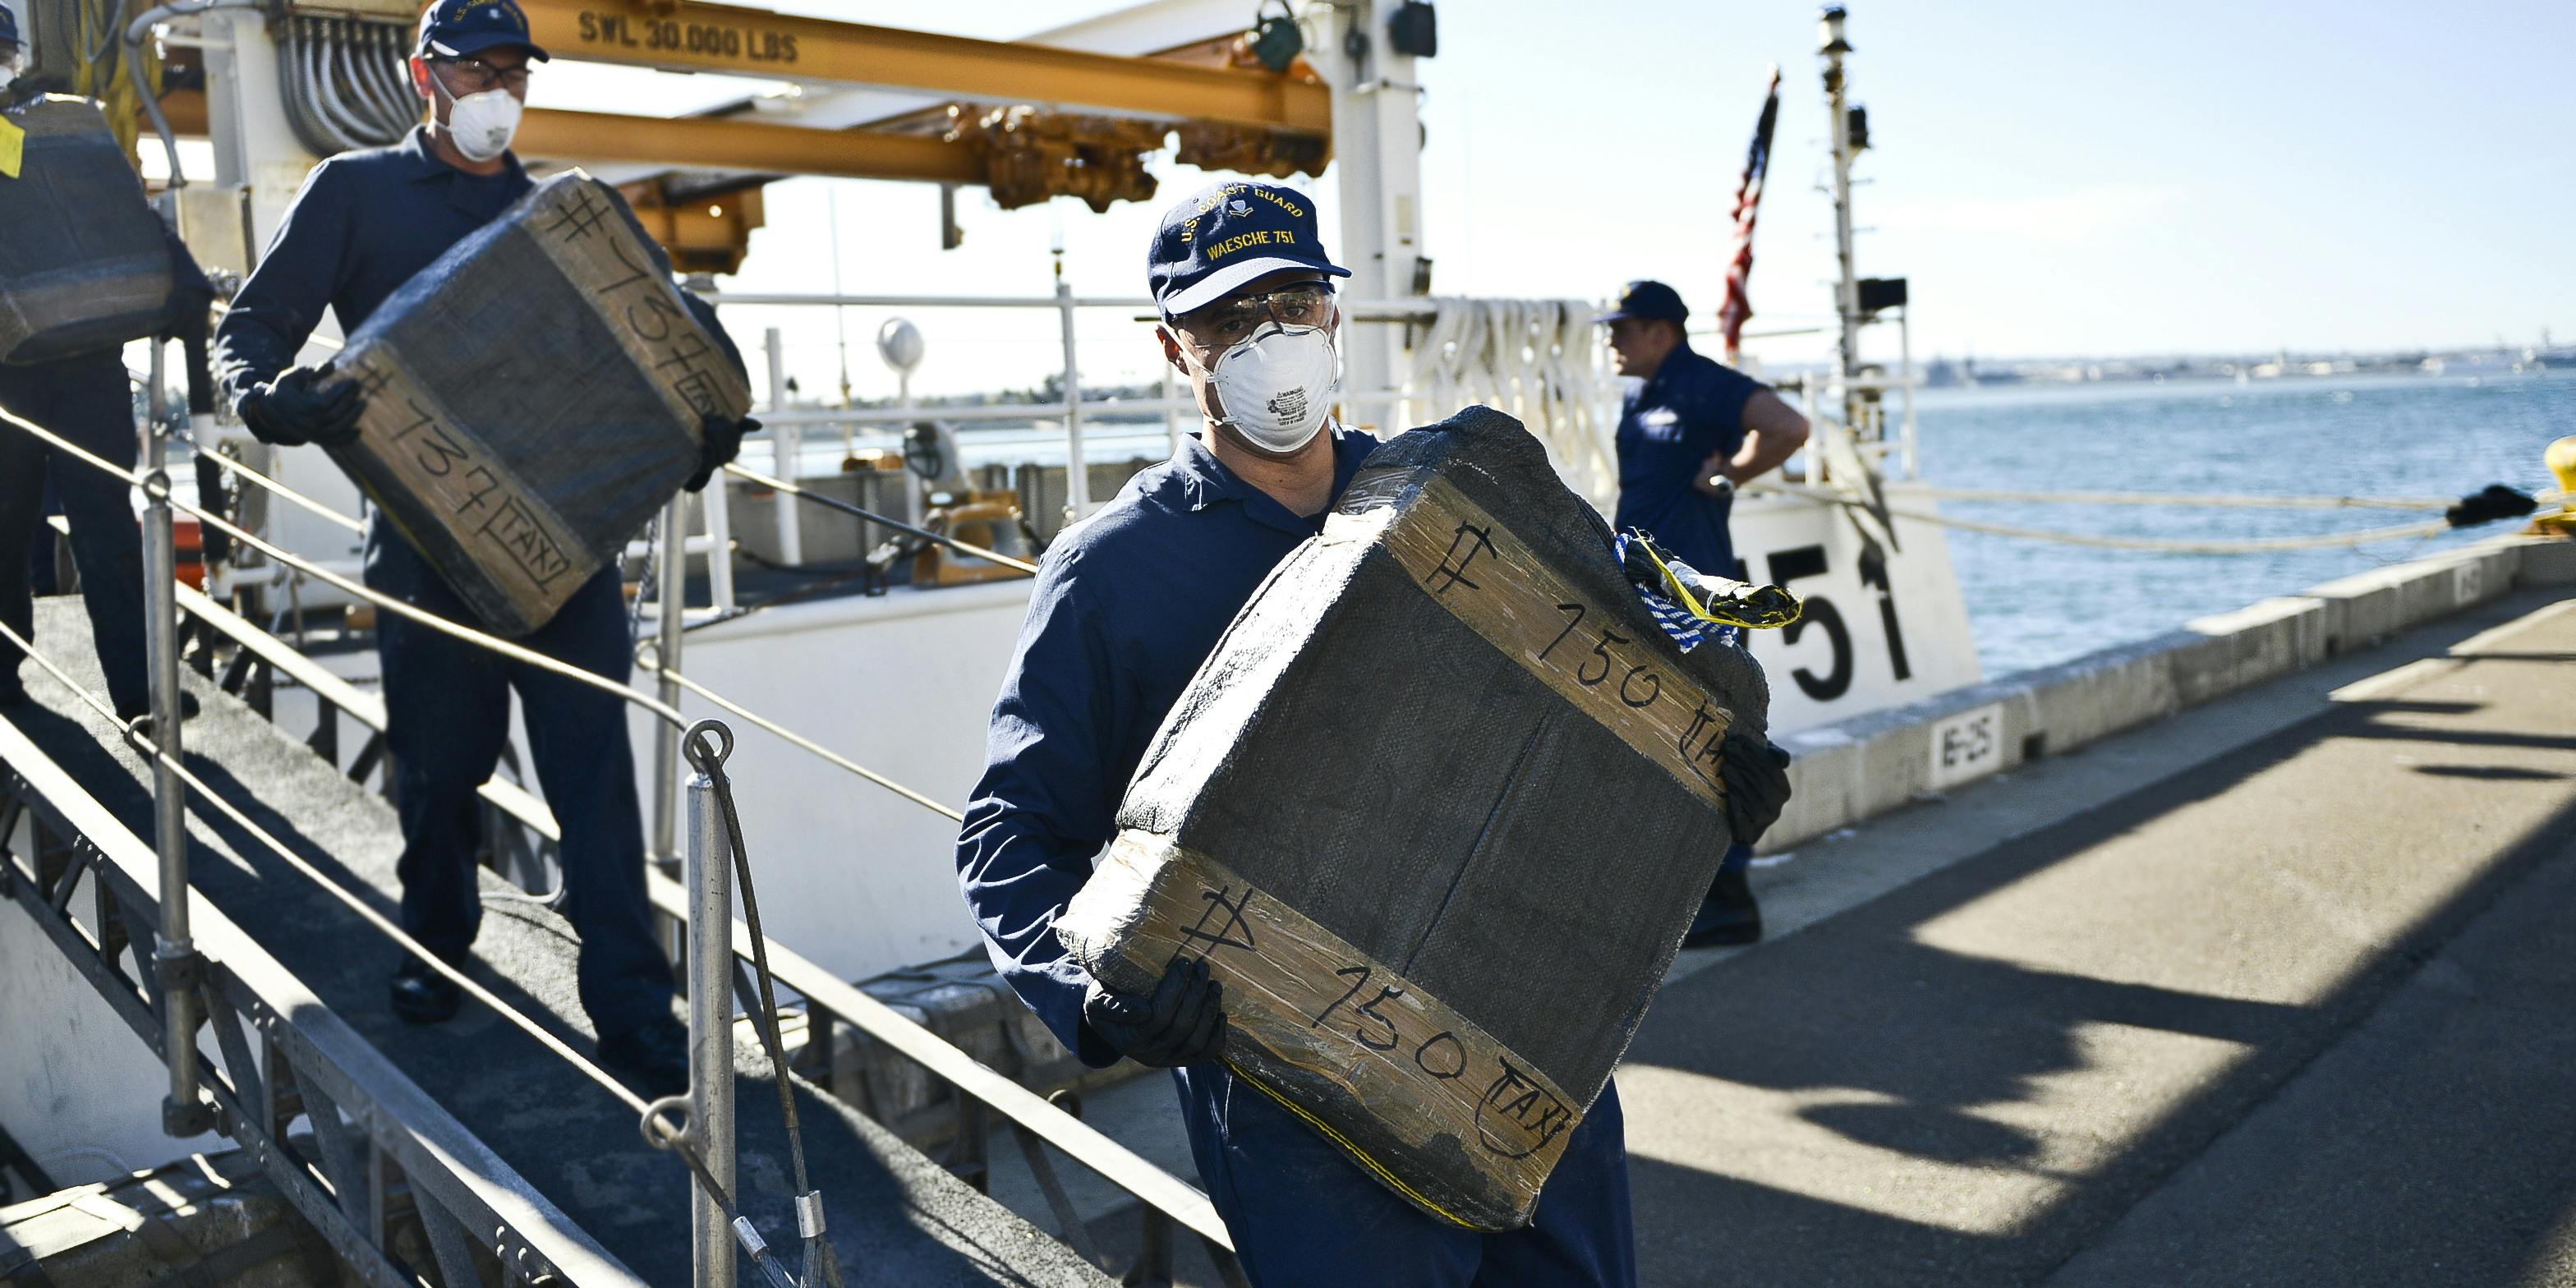 Crews from the U.S. Coast Guard Cutter Waesche offload nearly 660 kilograms of narcotics in 2015. Nearly 500 pounds of cannabis, $6000, and a gun were recently seized during the arrest of two individuals trying to illegally cross the border off Florida's coastline.